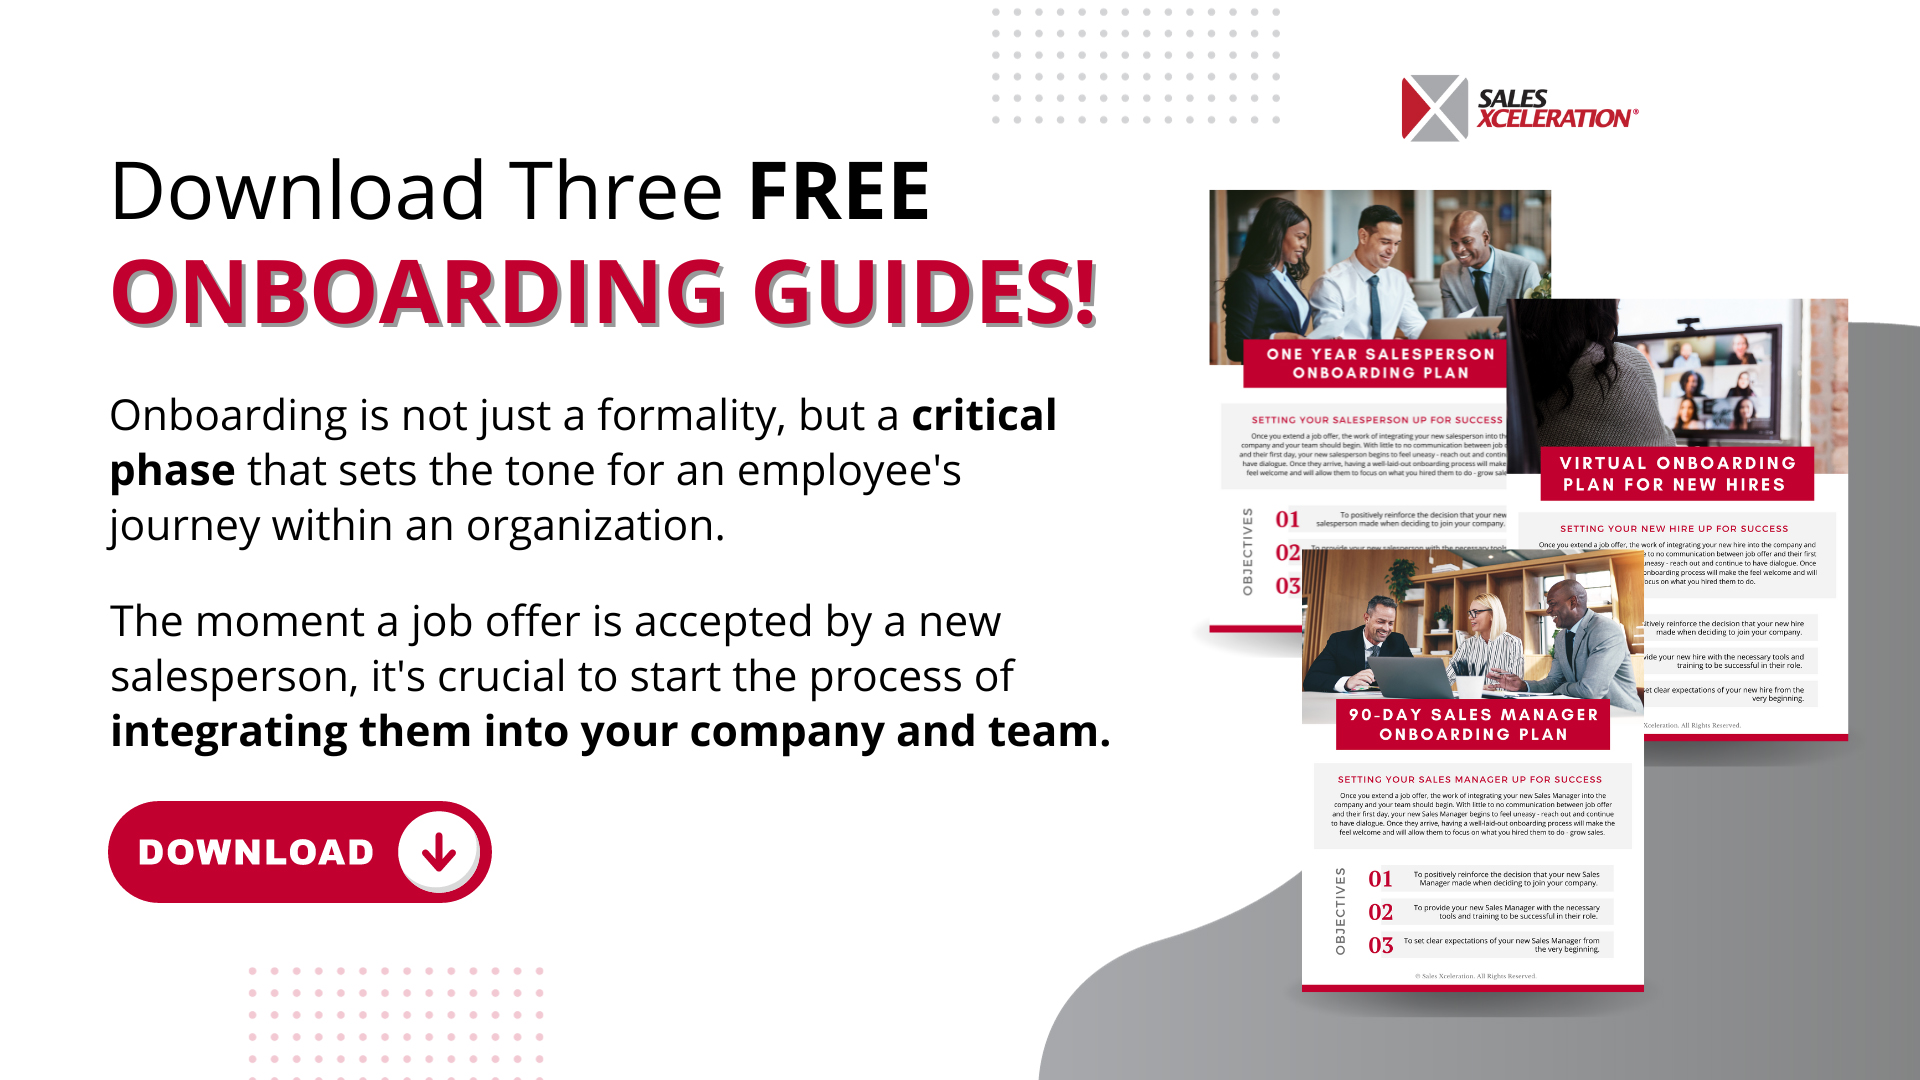 Download Sales Xceleration’s FREE Onboarding Guides